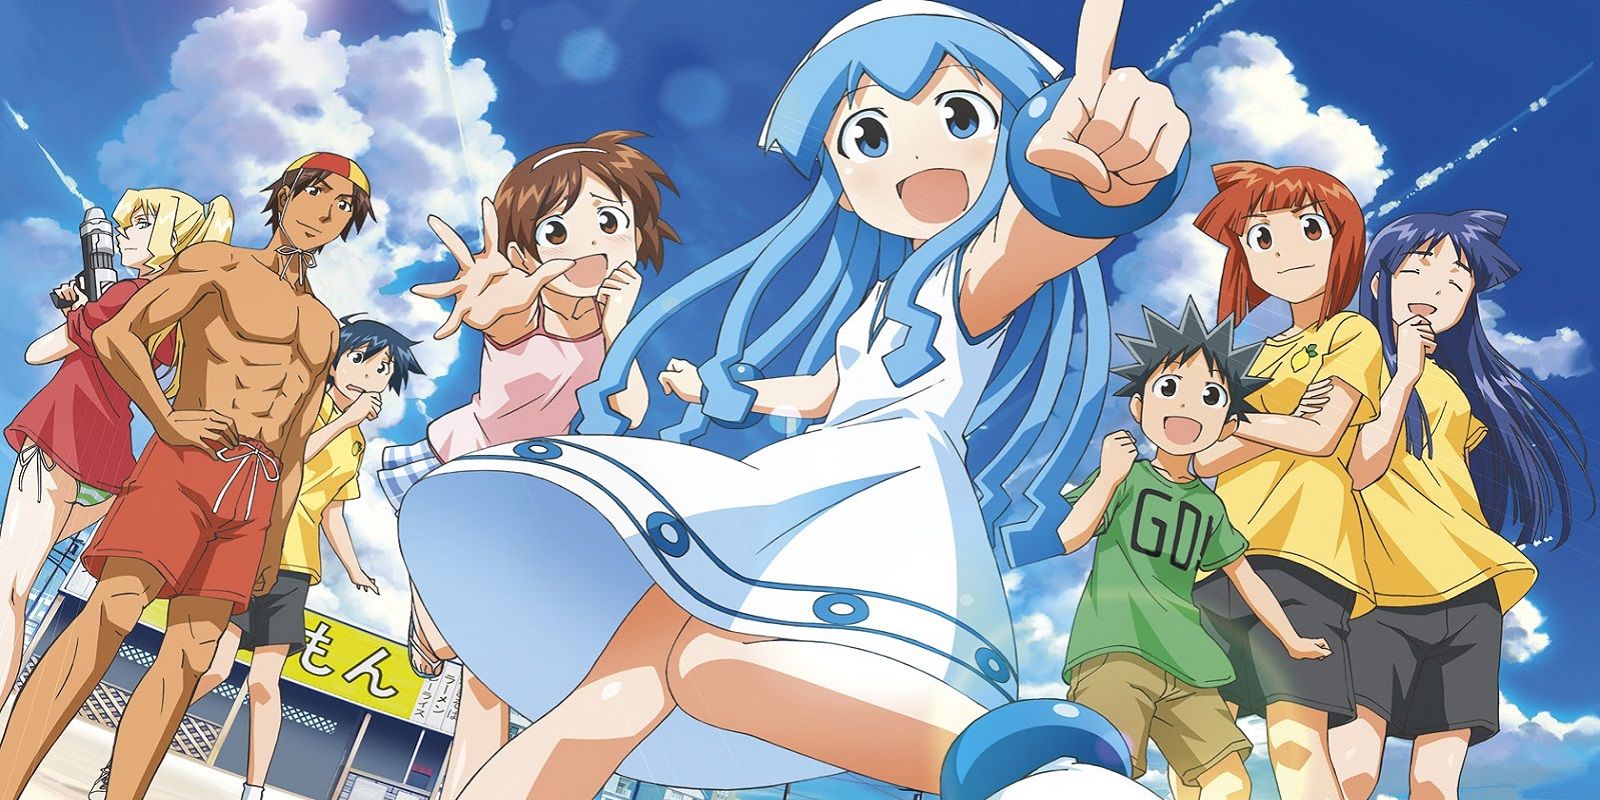 The protagonist of Squid Girl, pointing forward while the rest of the cast watches on in the background.